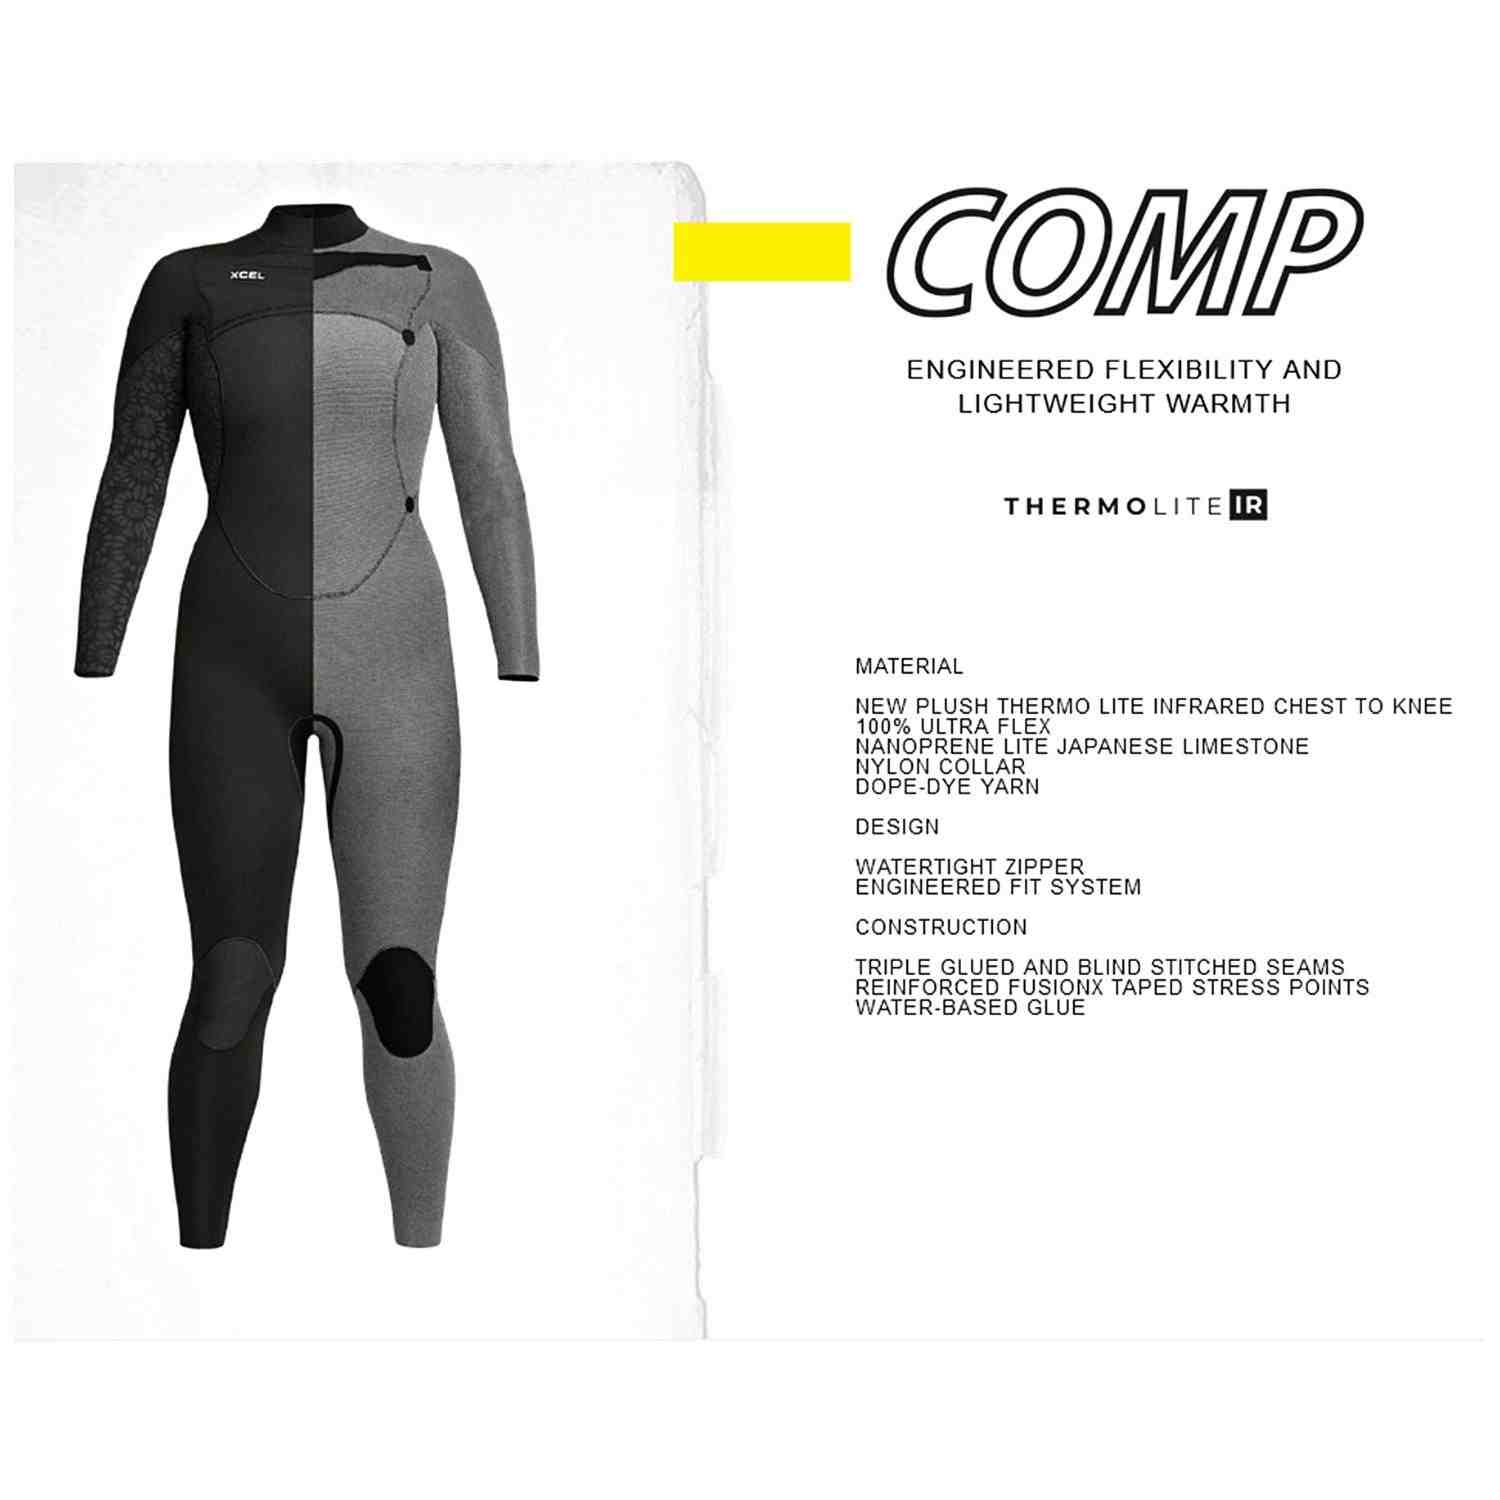 What are Comp wetsuits?